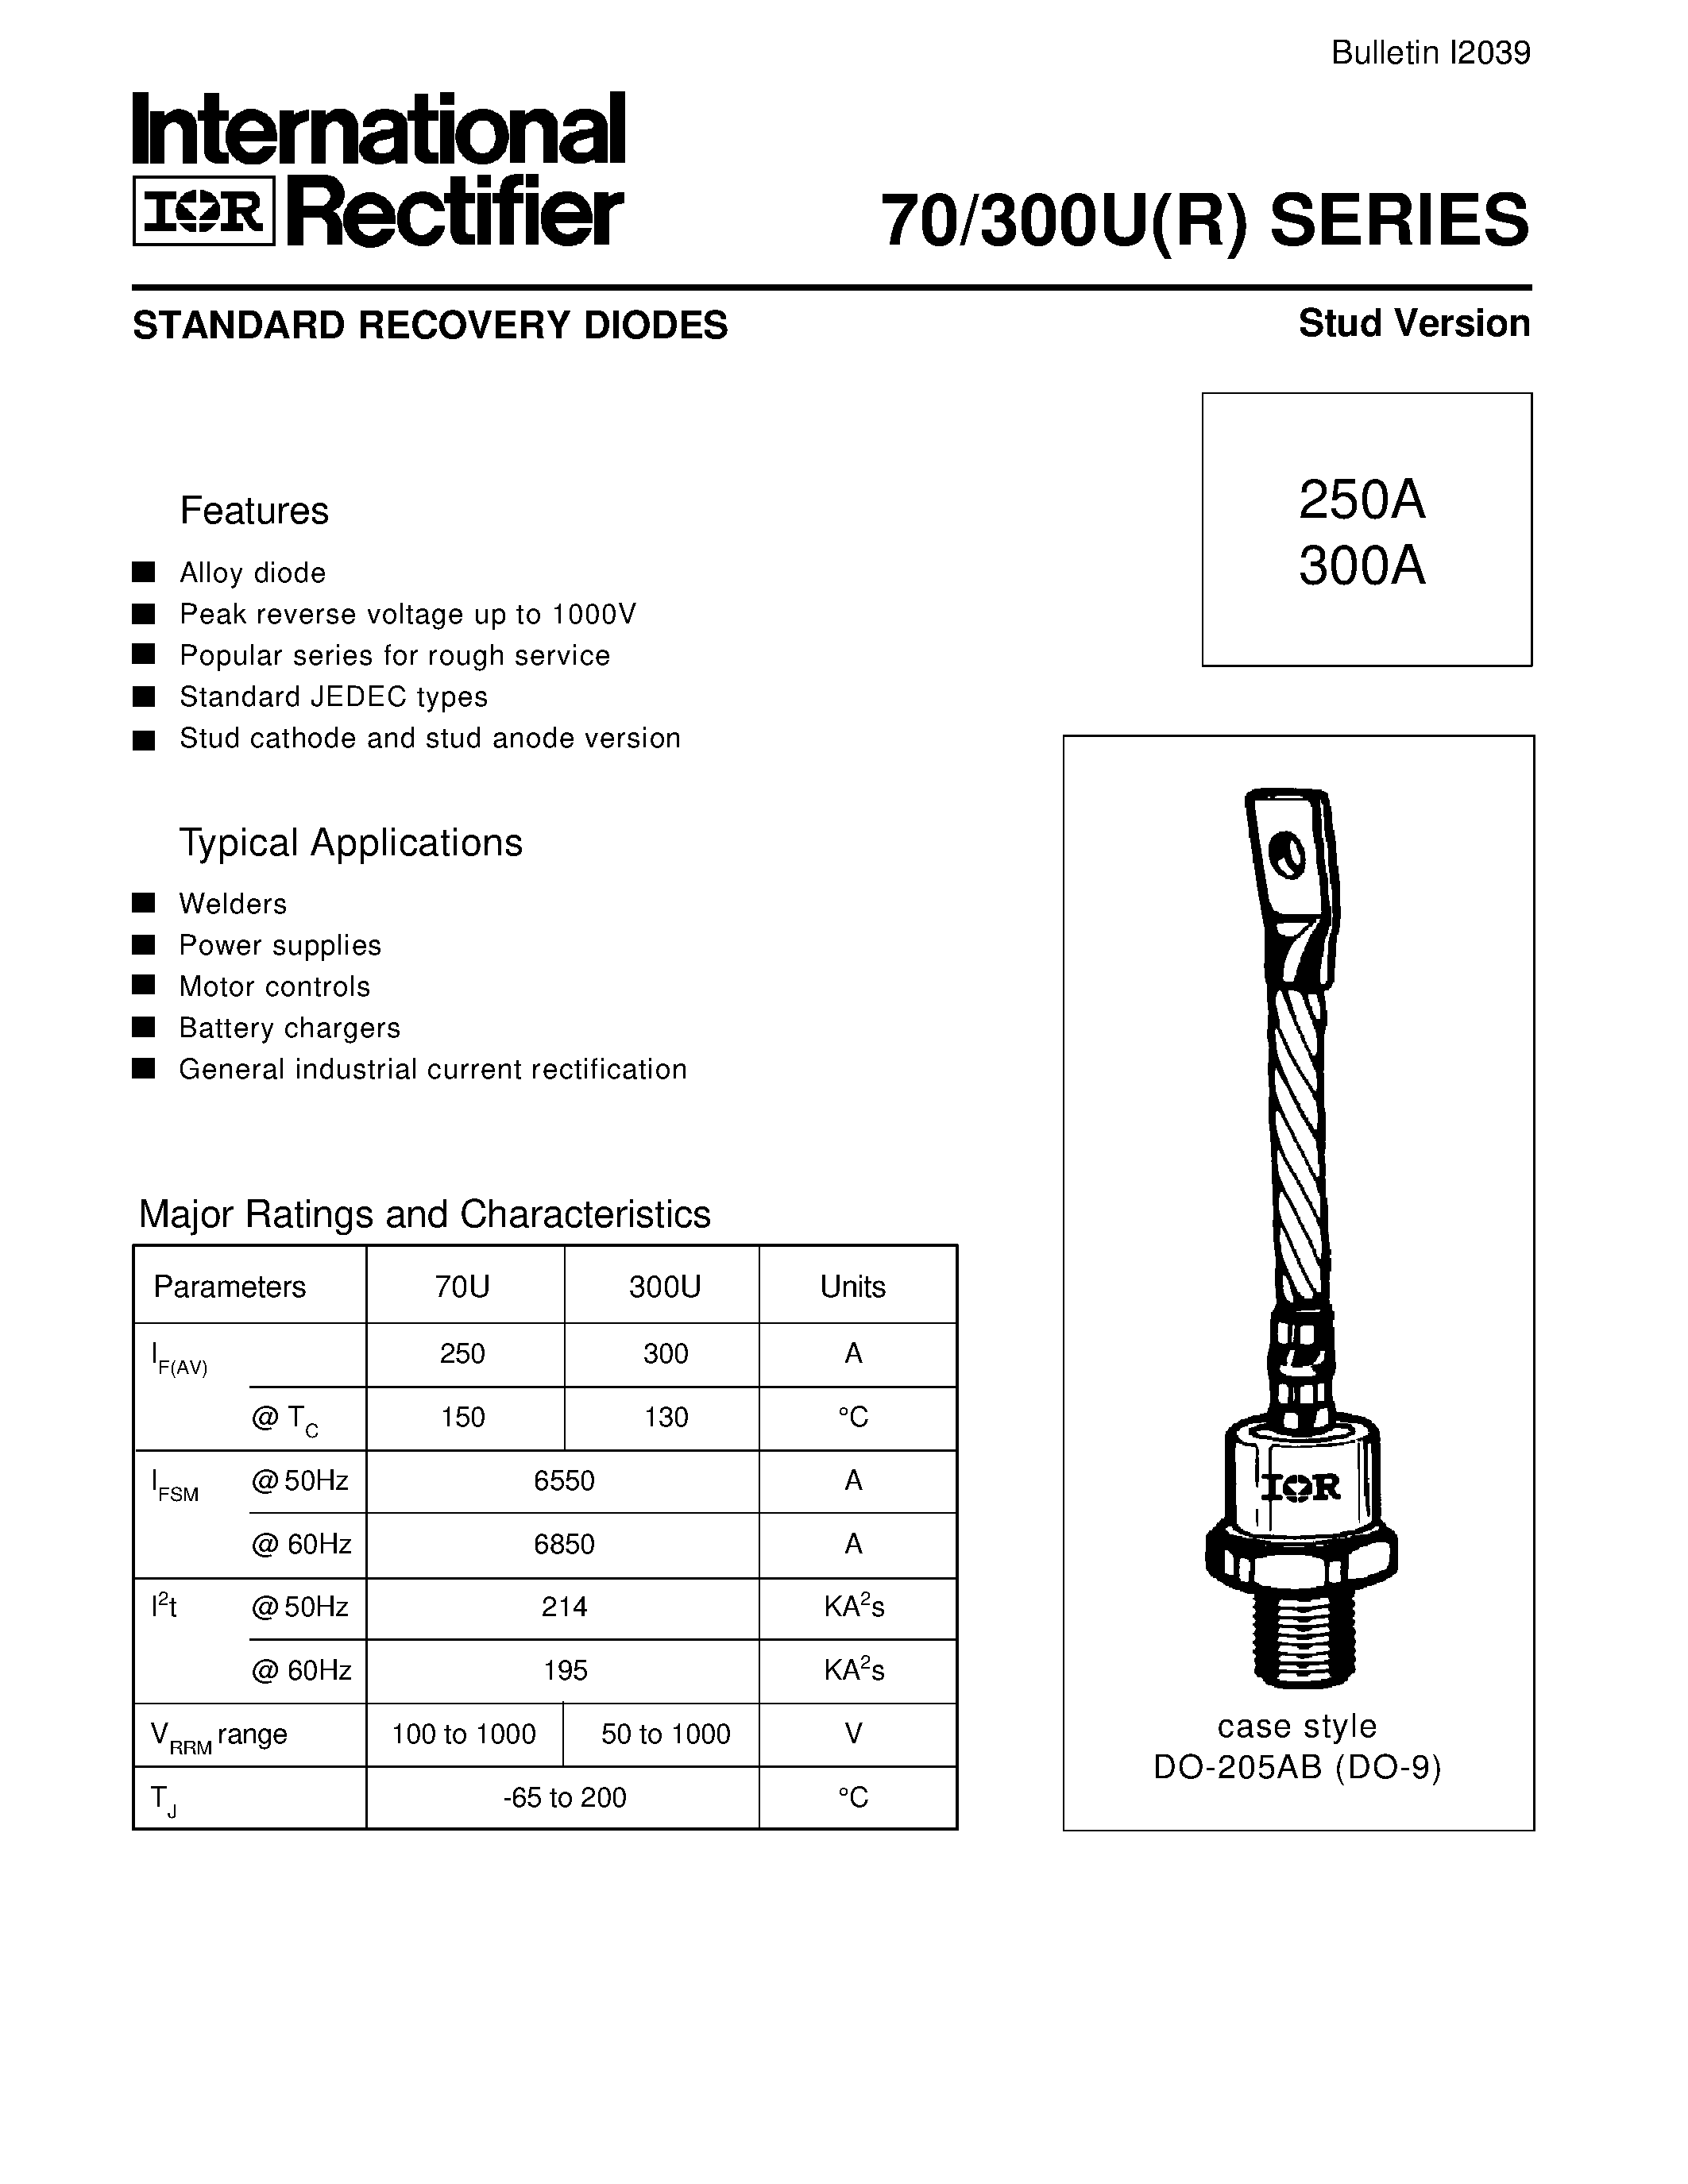 Datasheet 300U(R) - STANDARD RECOVERY DIODES Stud Version page 1